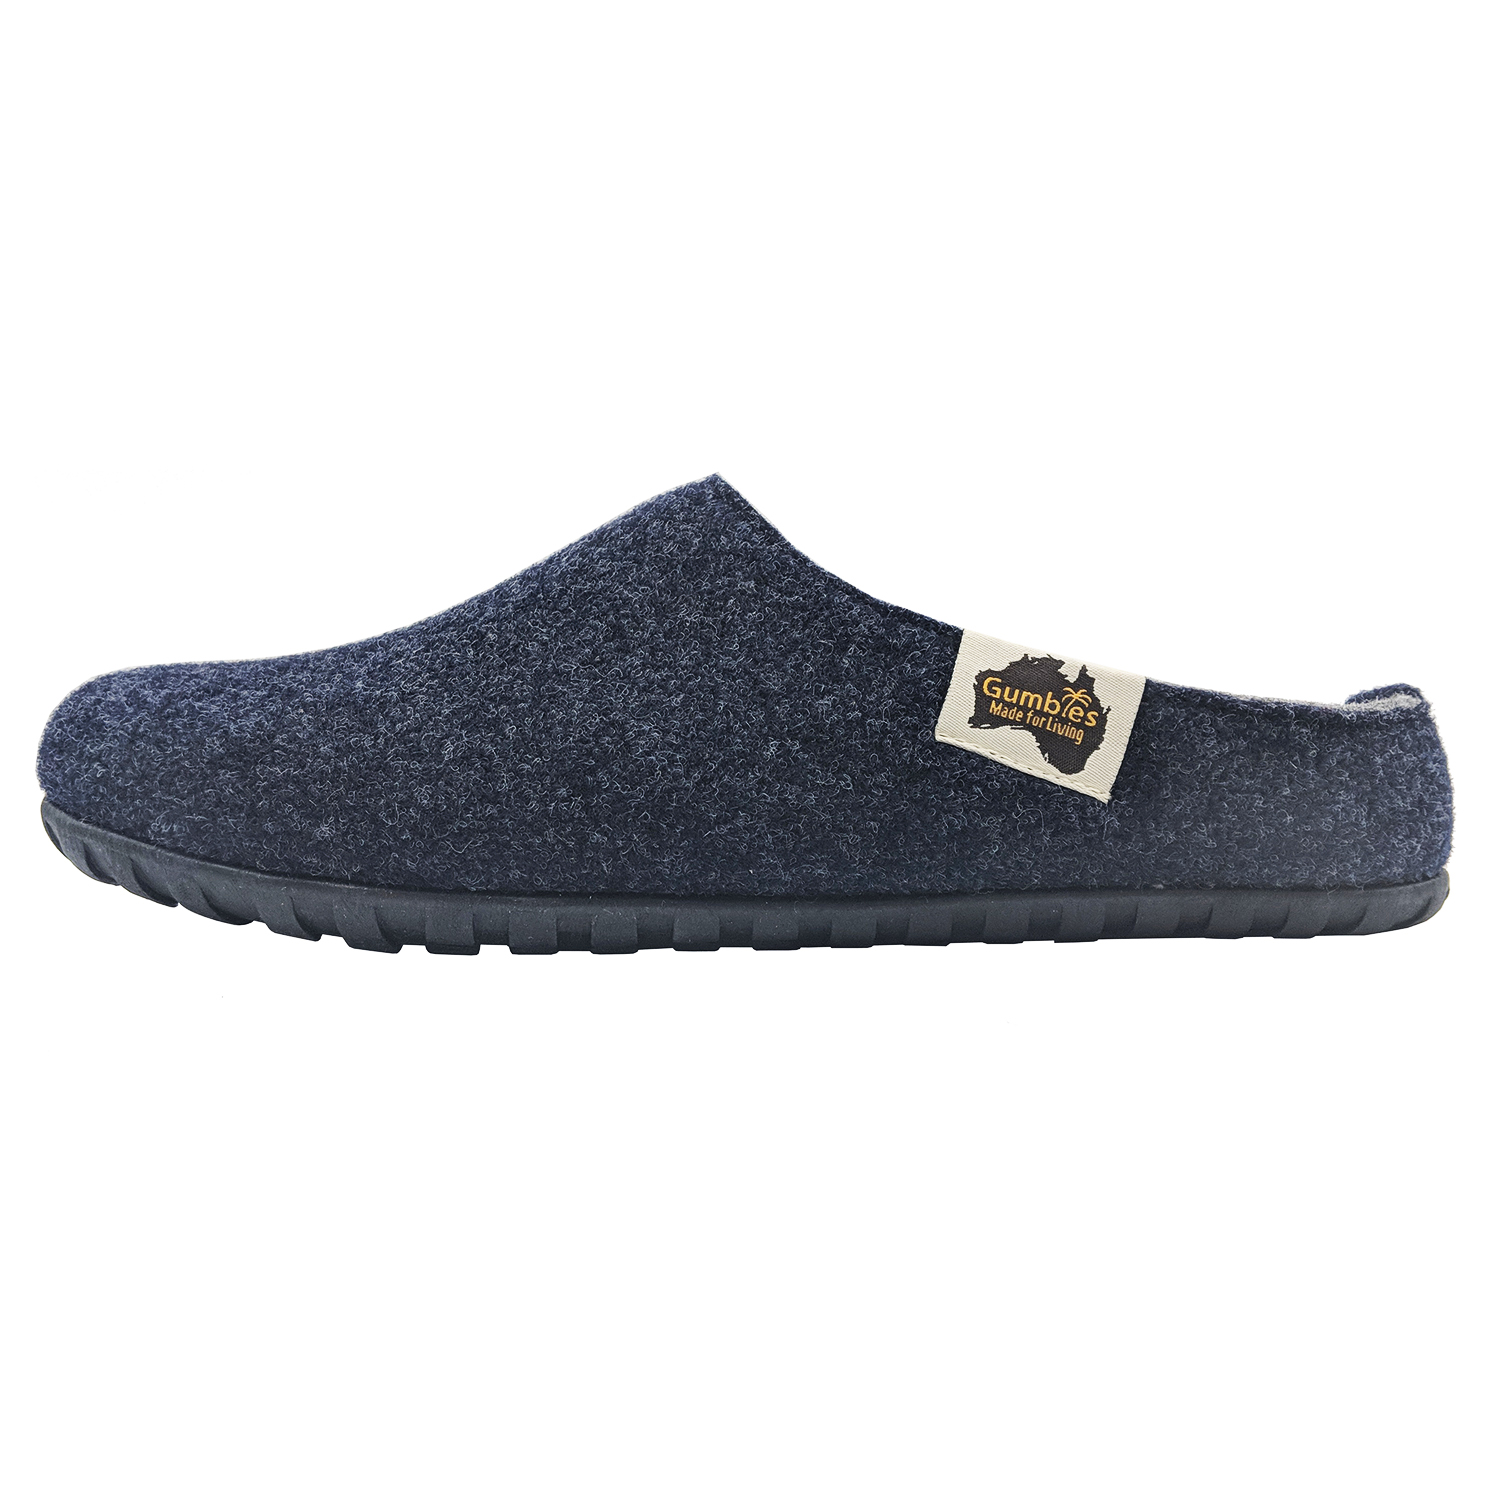 Gumbies Outback Hausschuh Navy-Grey